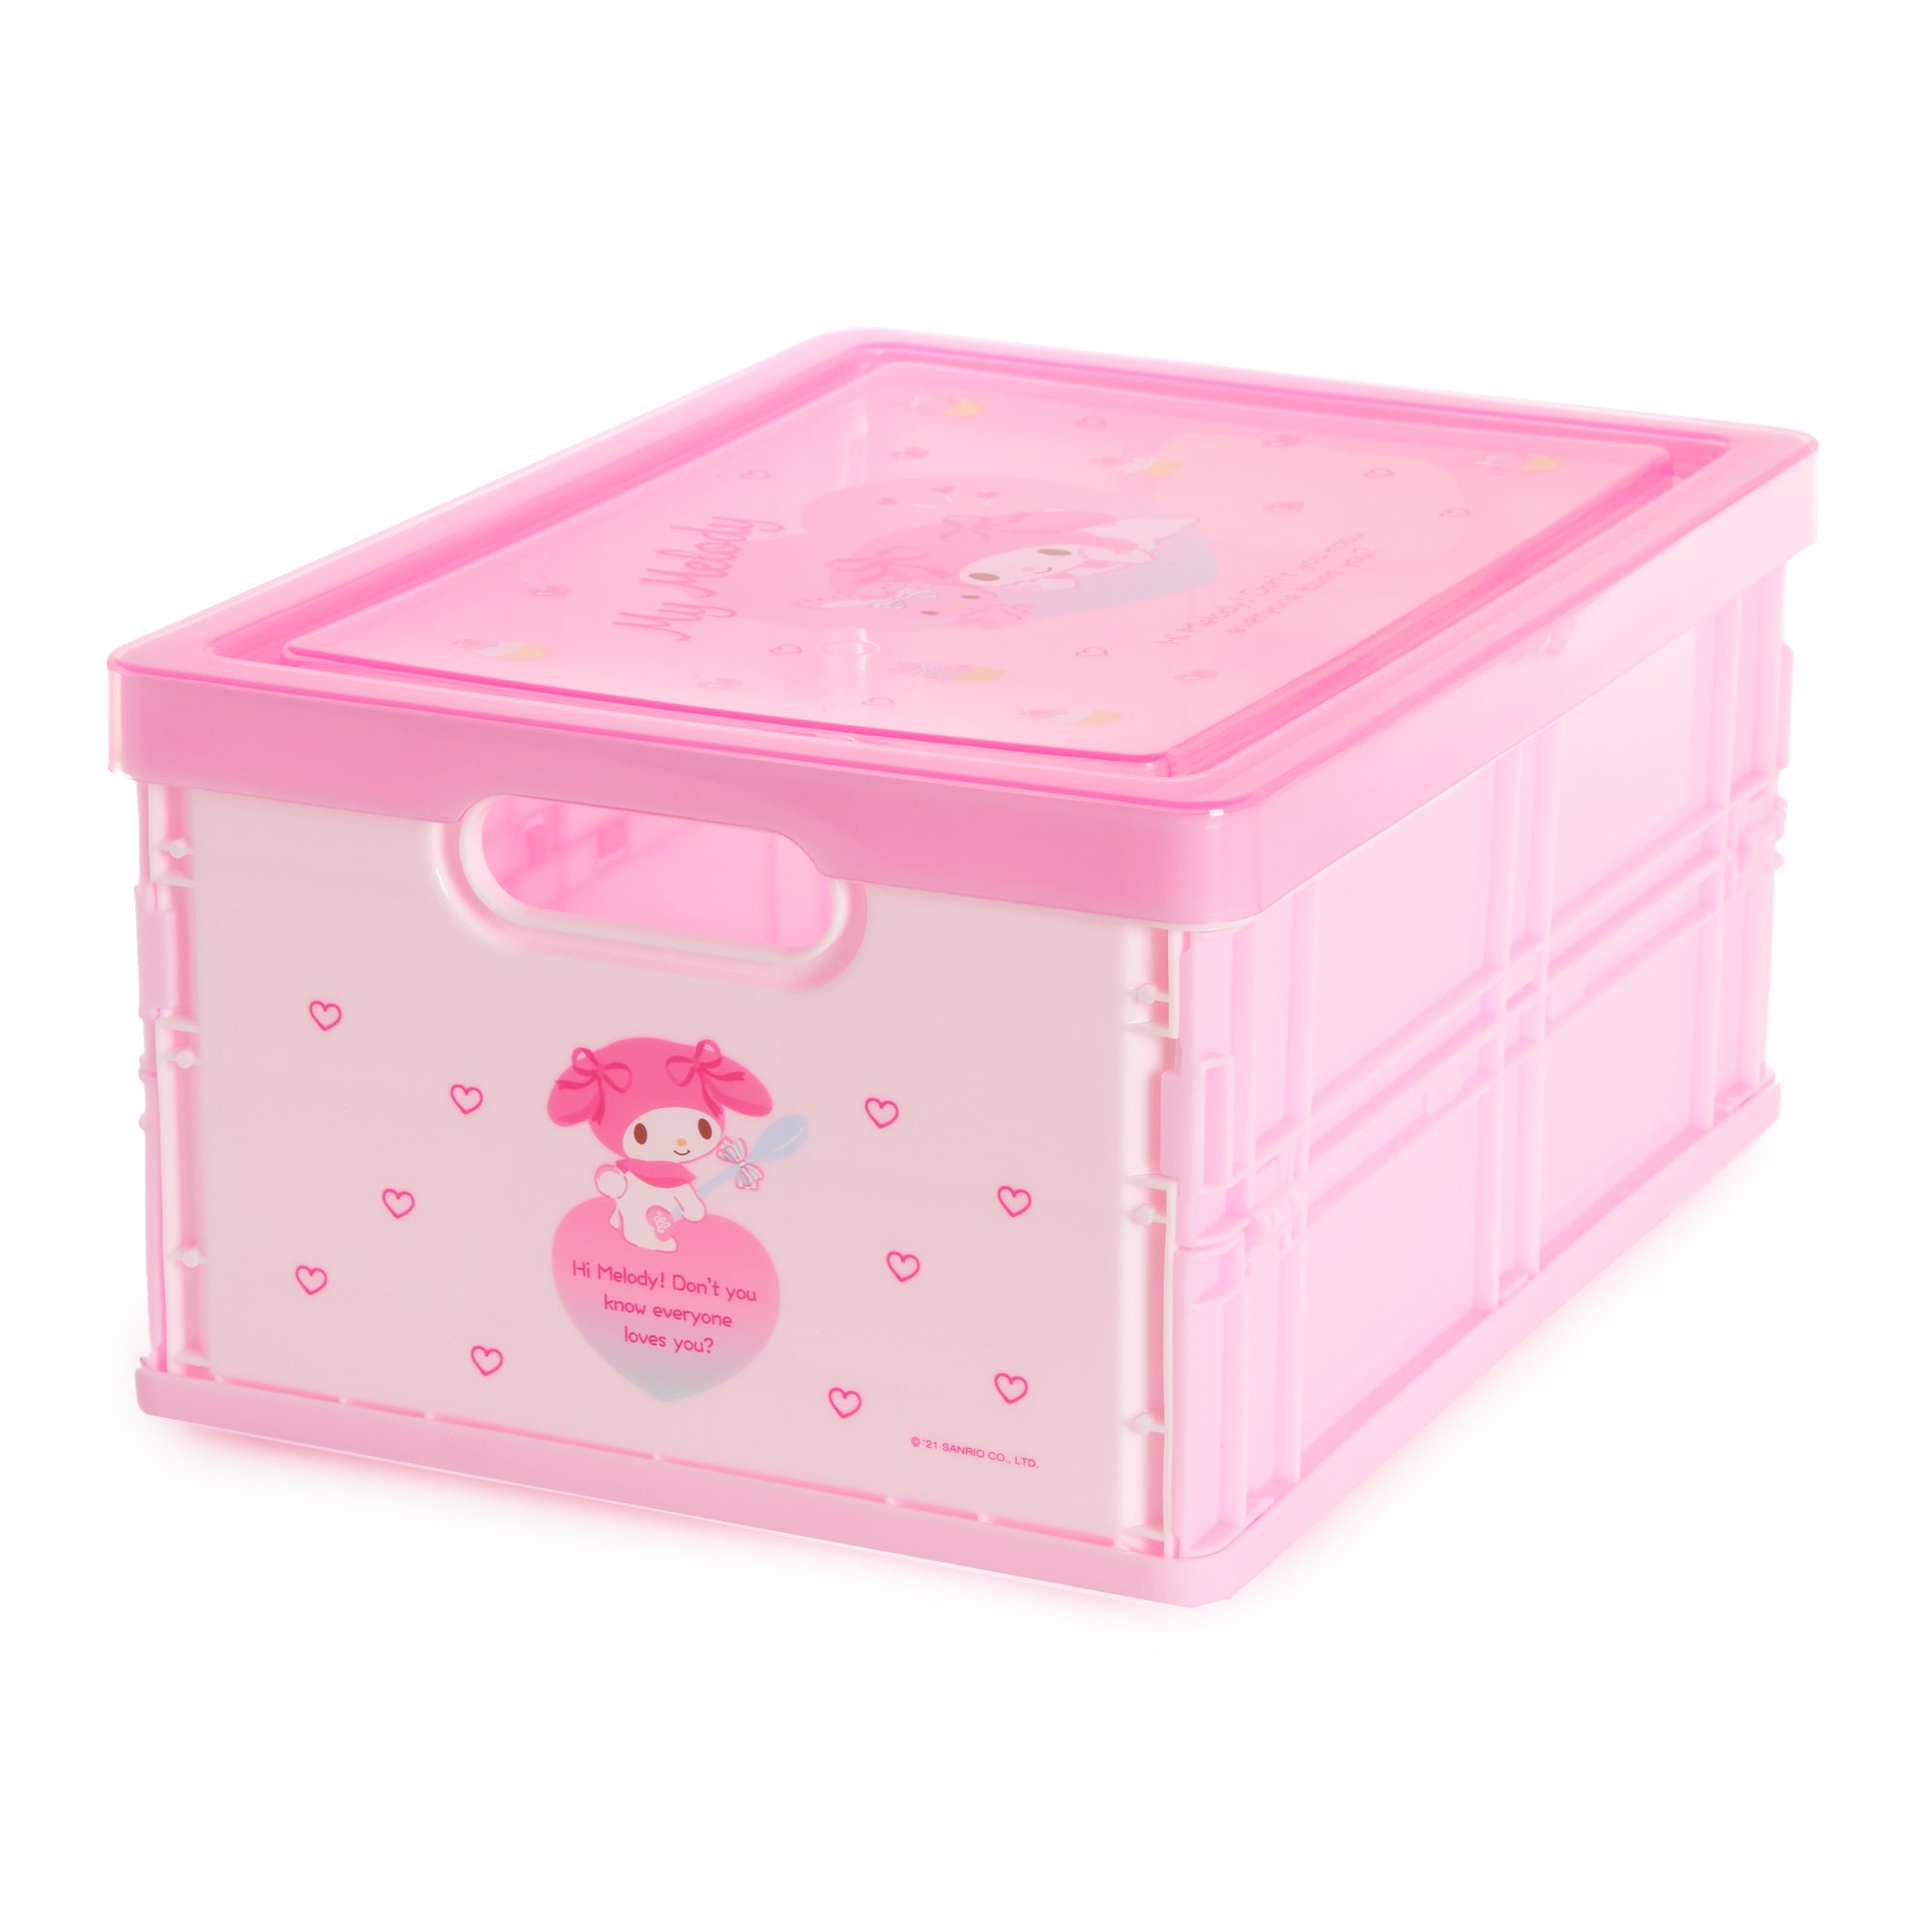 Buy Sanrio My Melody Glitter Small Clear Storage Case with Handle at ARTBOX